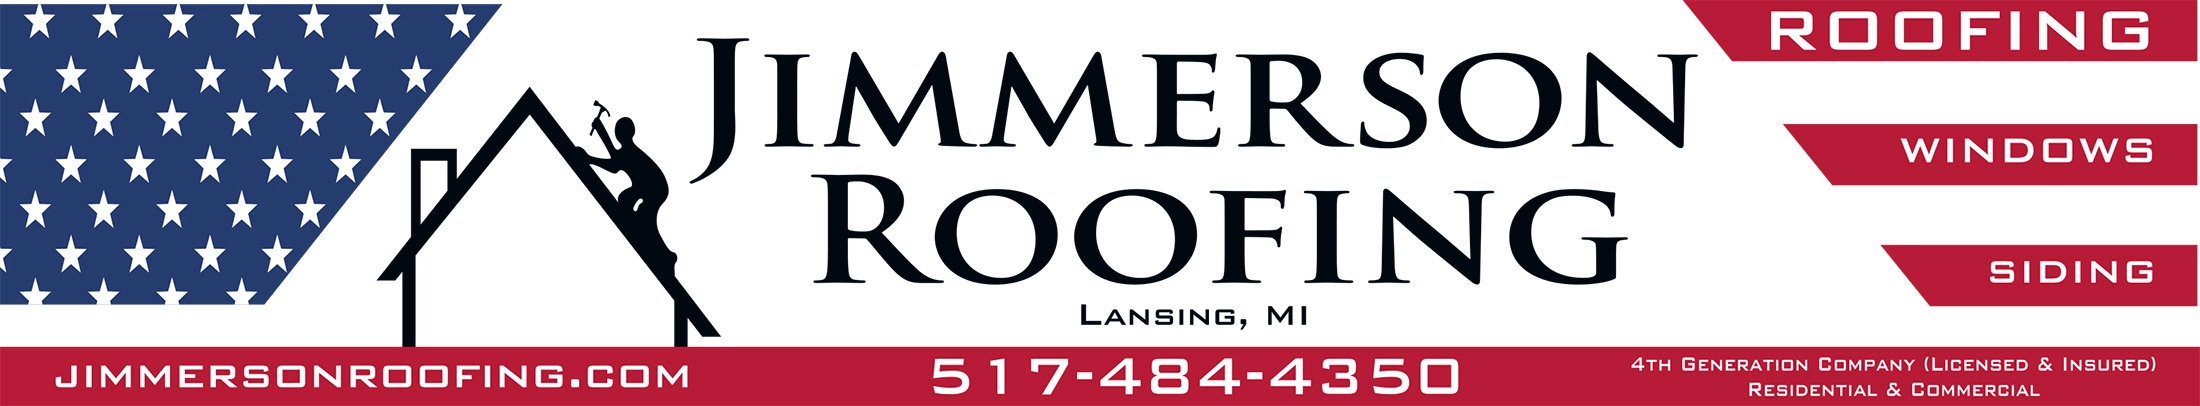 Jimmerson Roofing Logo